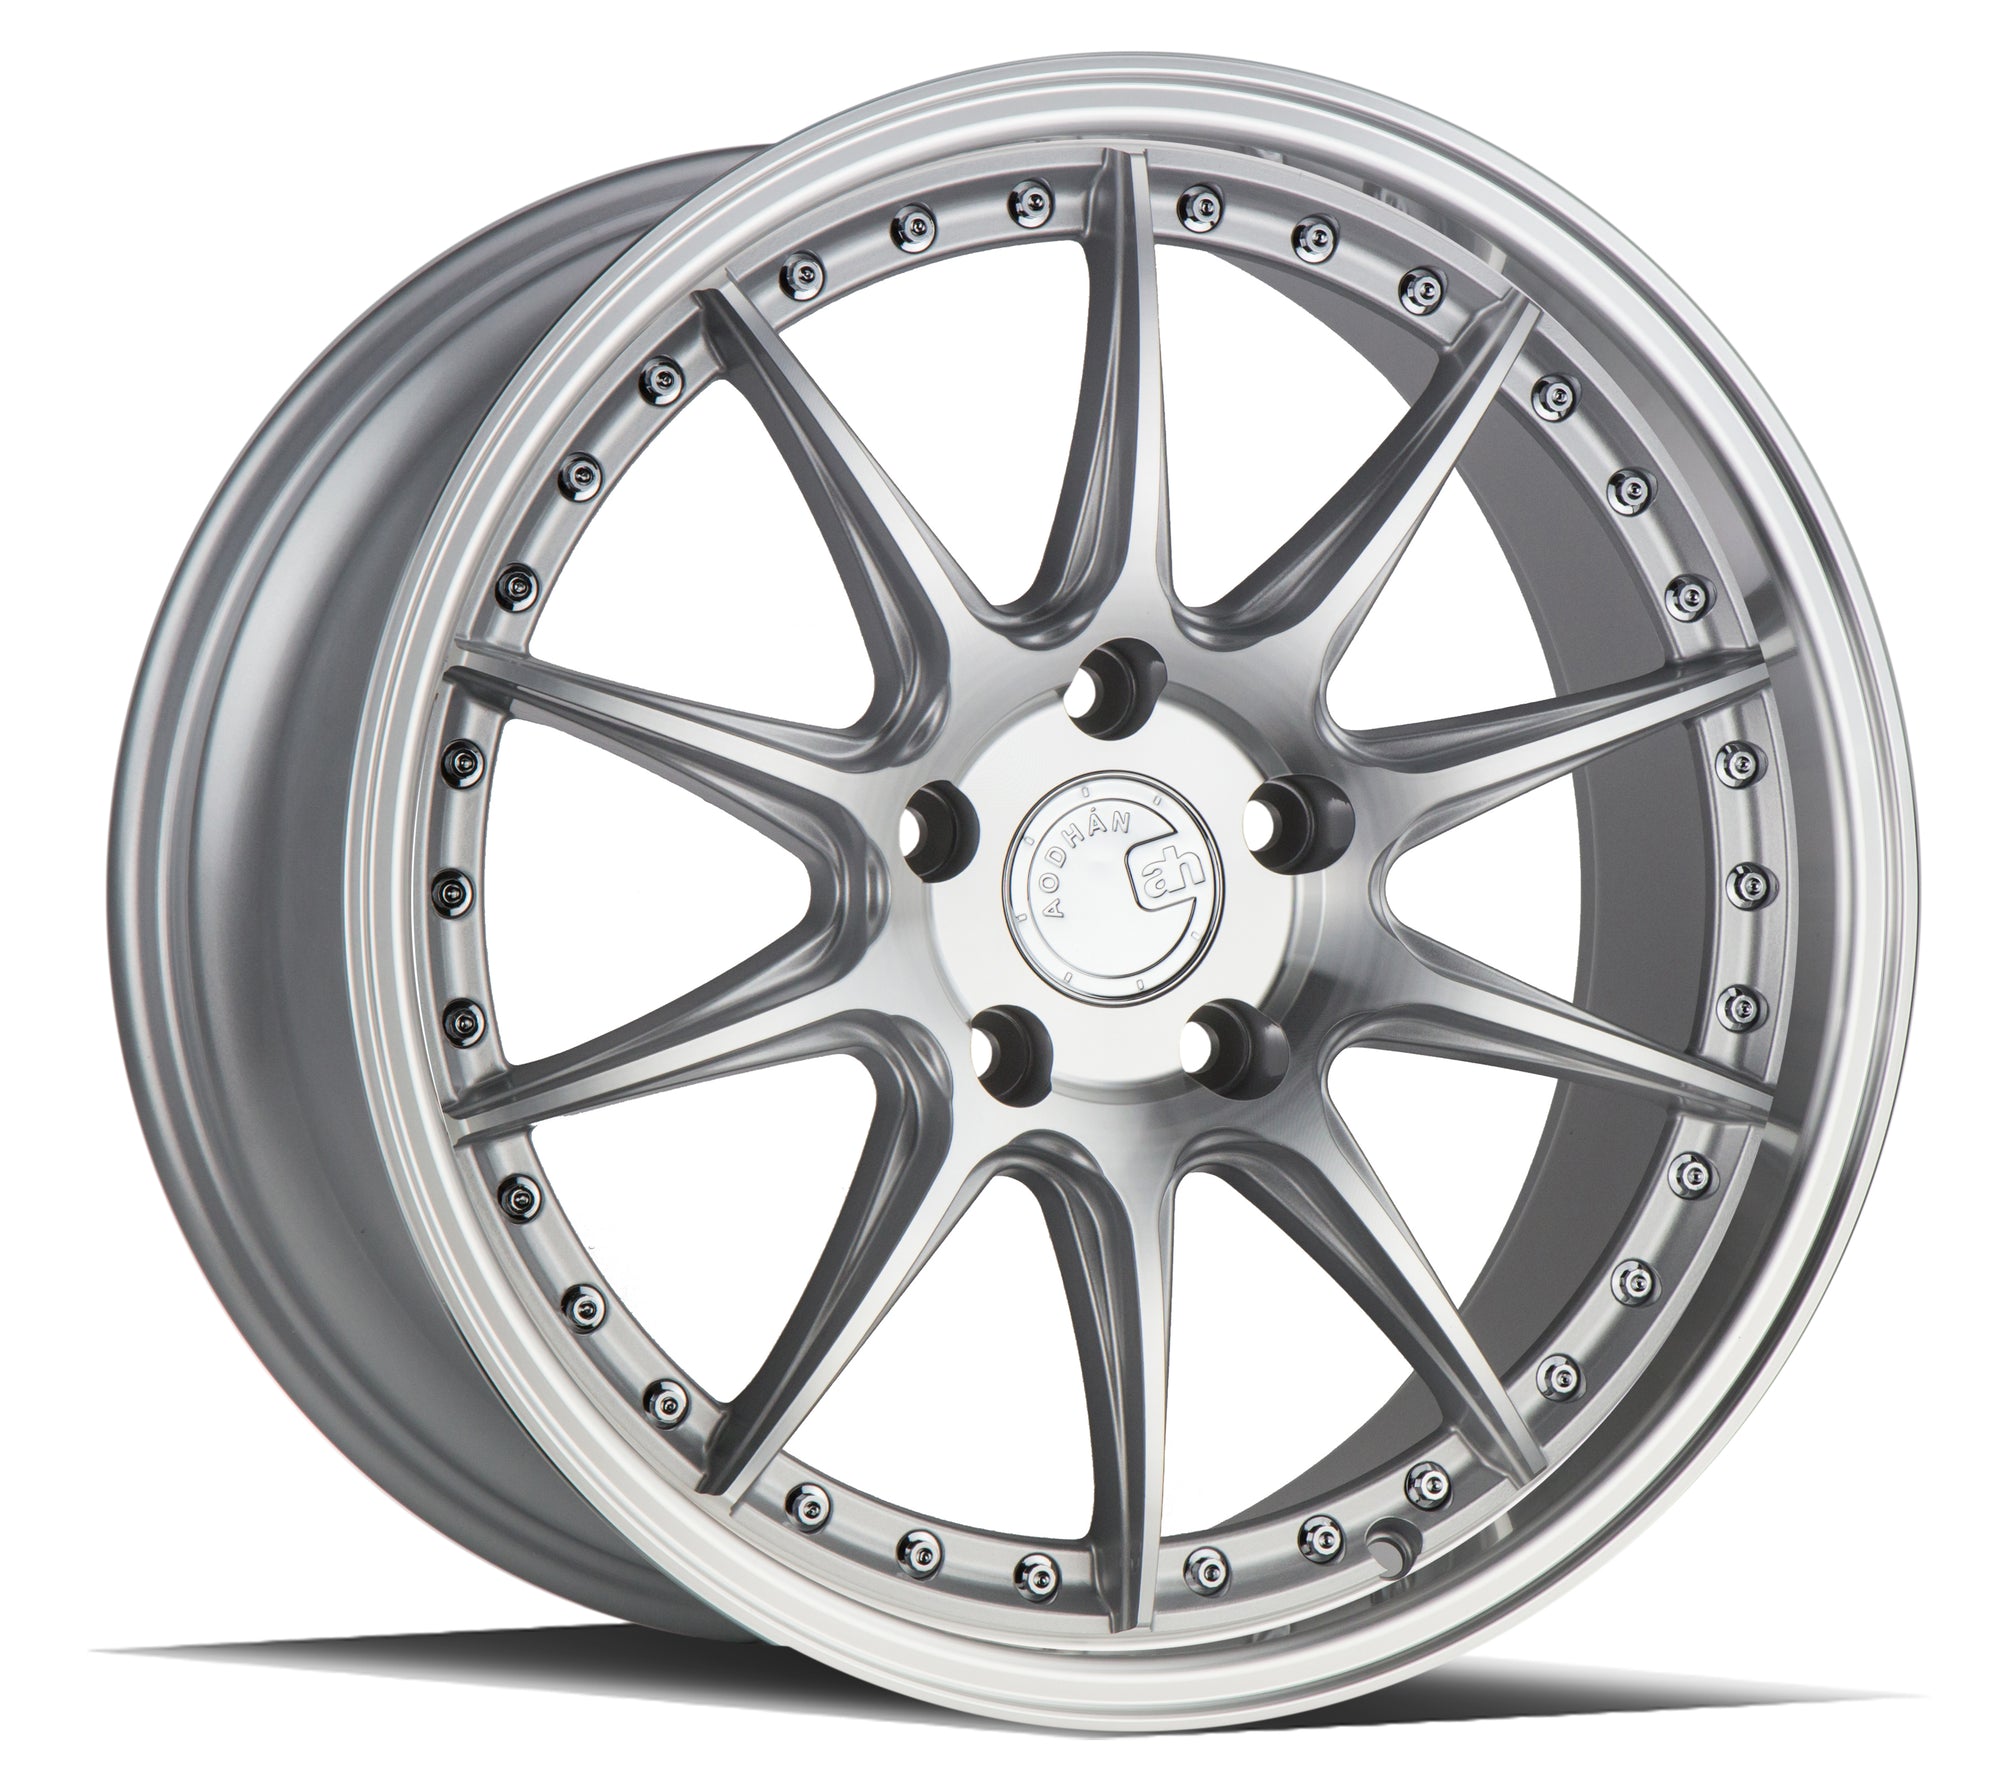 Aodhan DS07 18x8.5 5x114.3 +35 Silver w/Machined Face